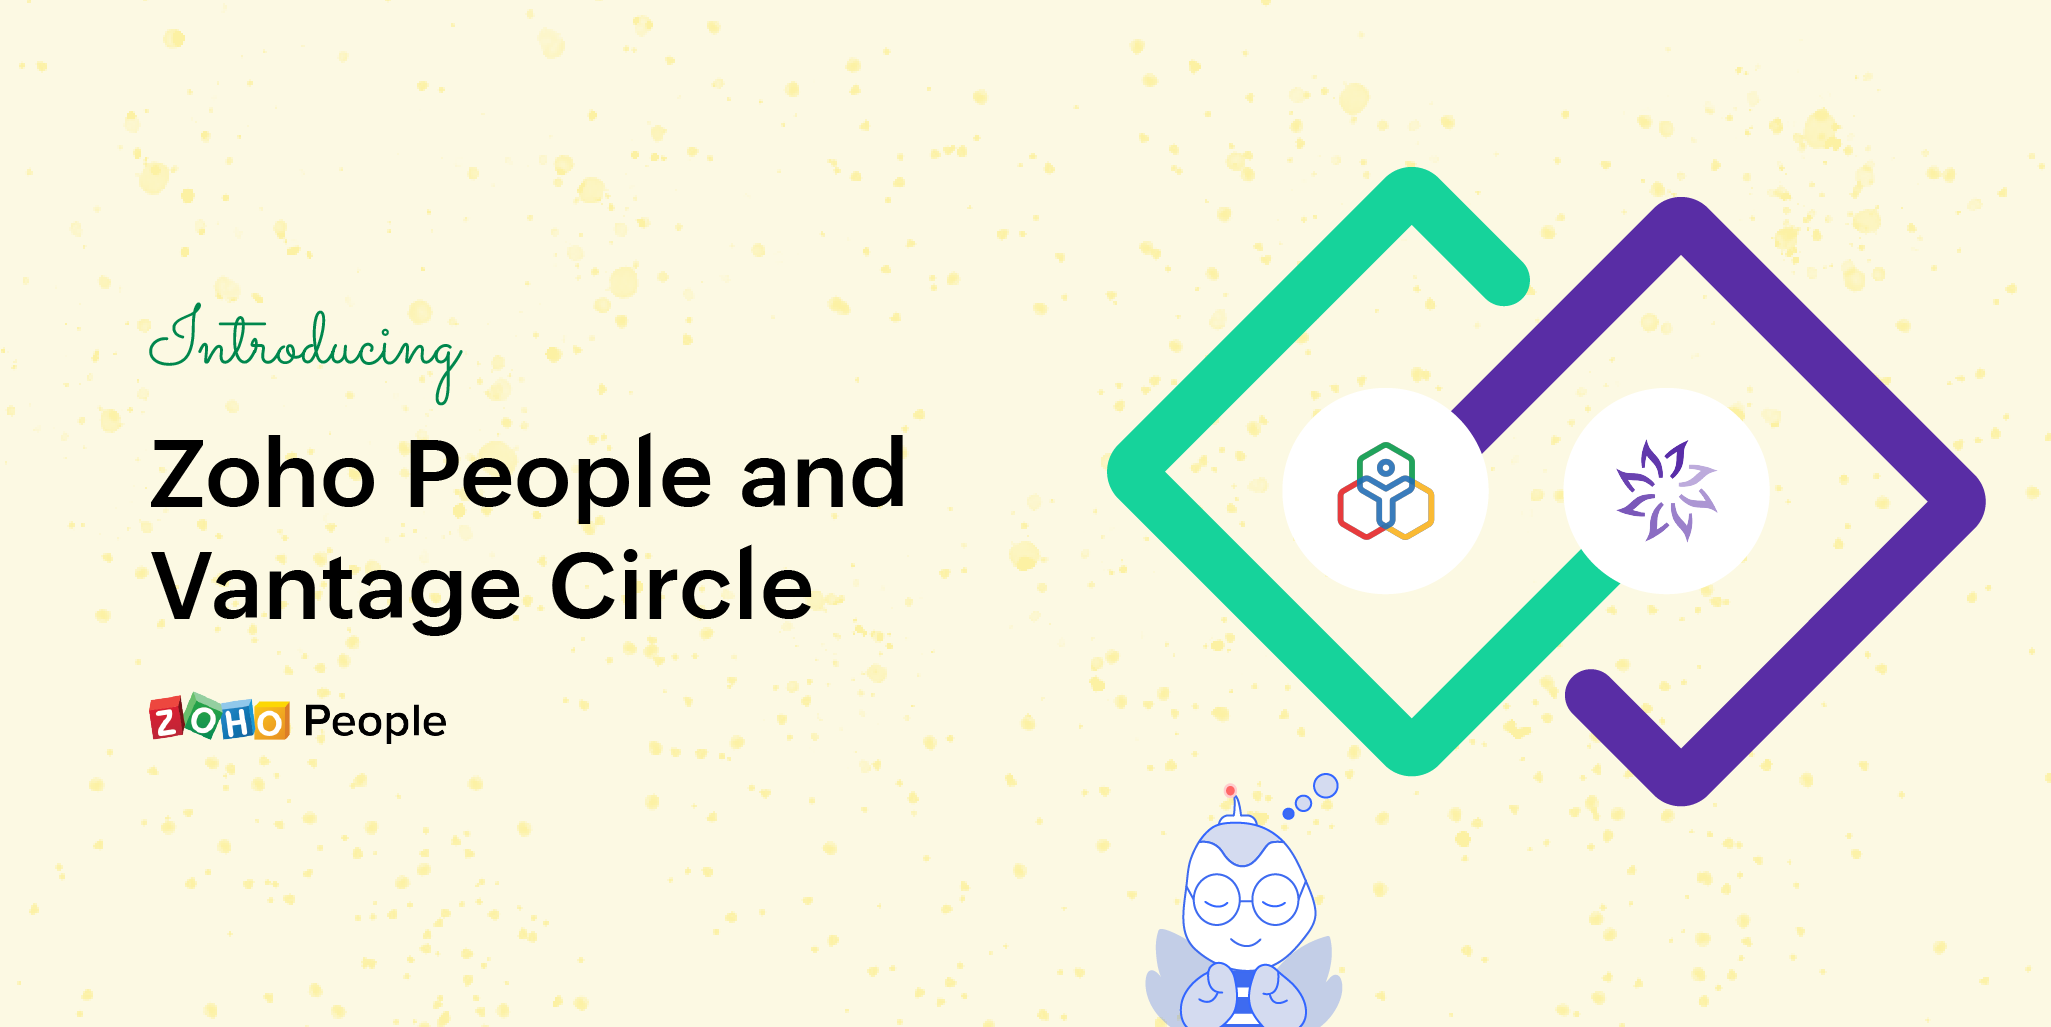 Introducing Vantage Circle for Zoho People: Motivate your employees with rewards